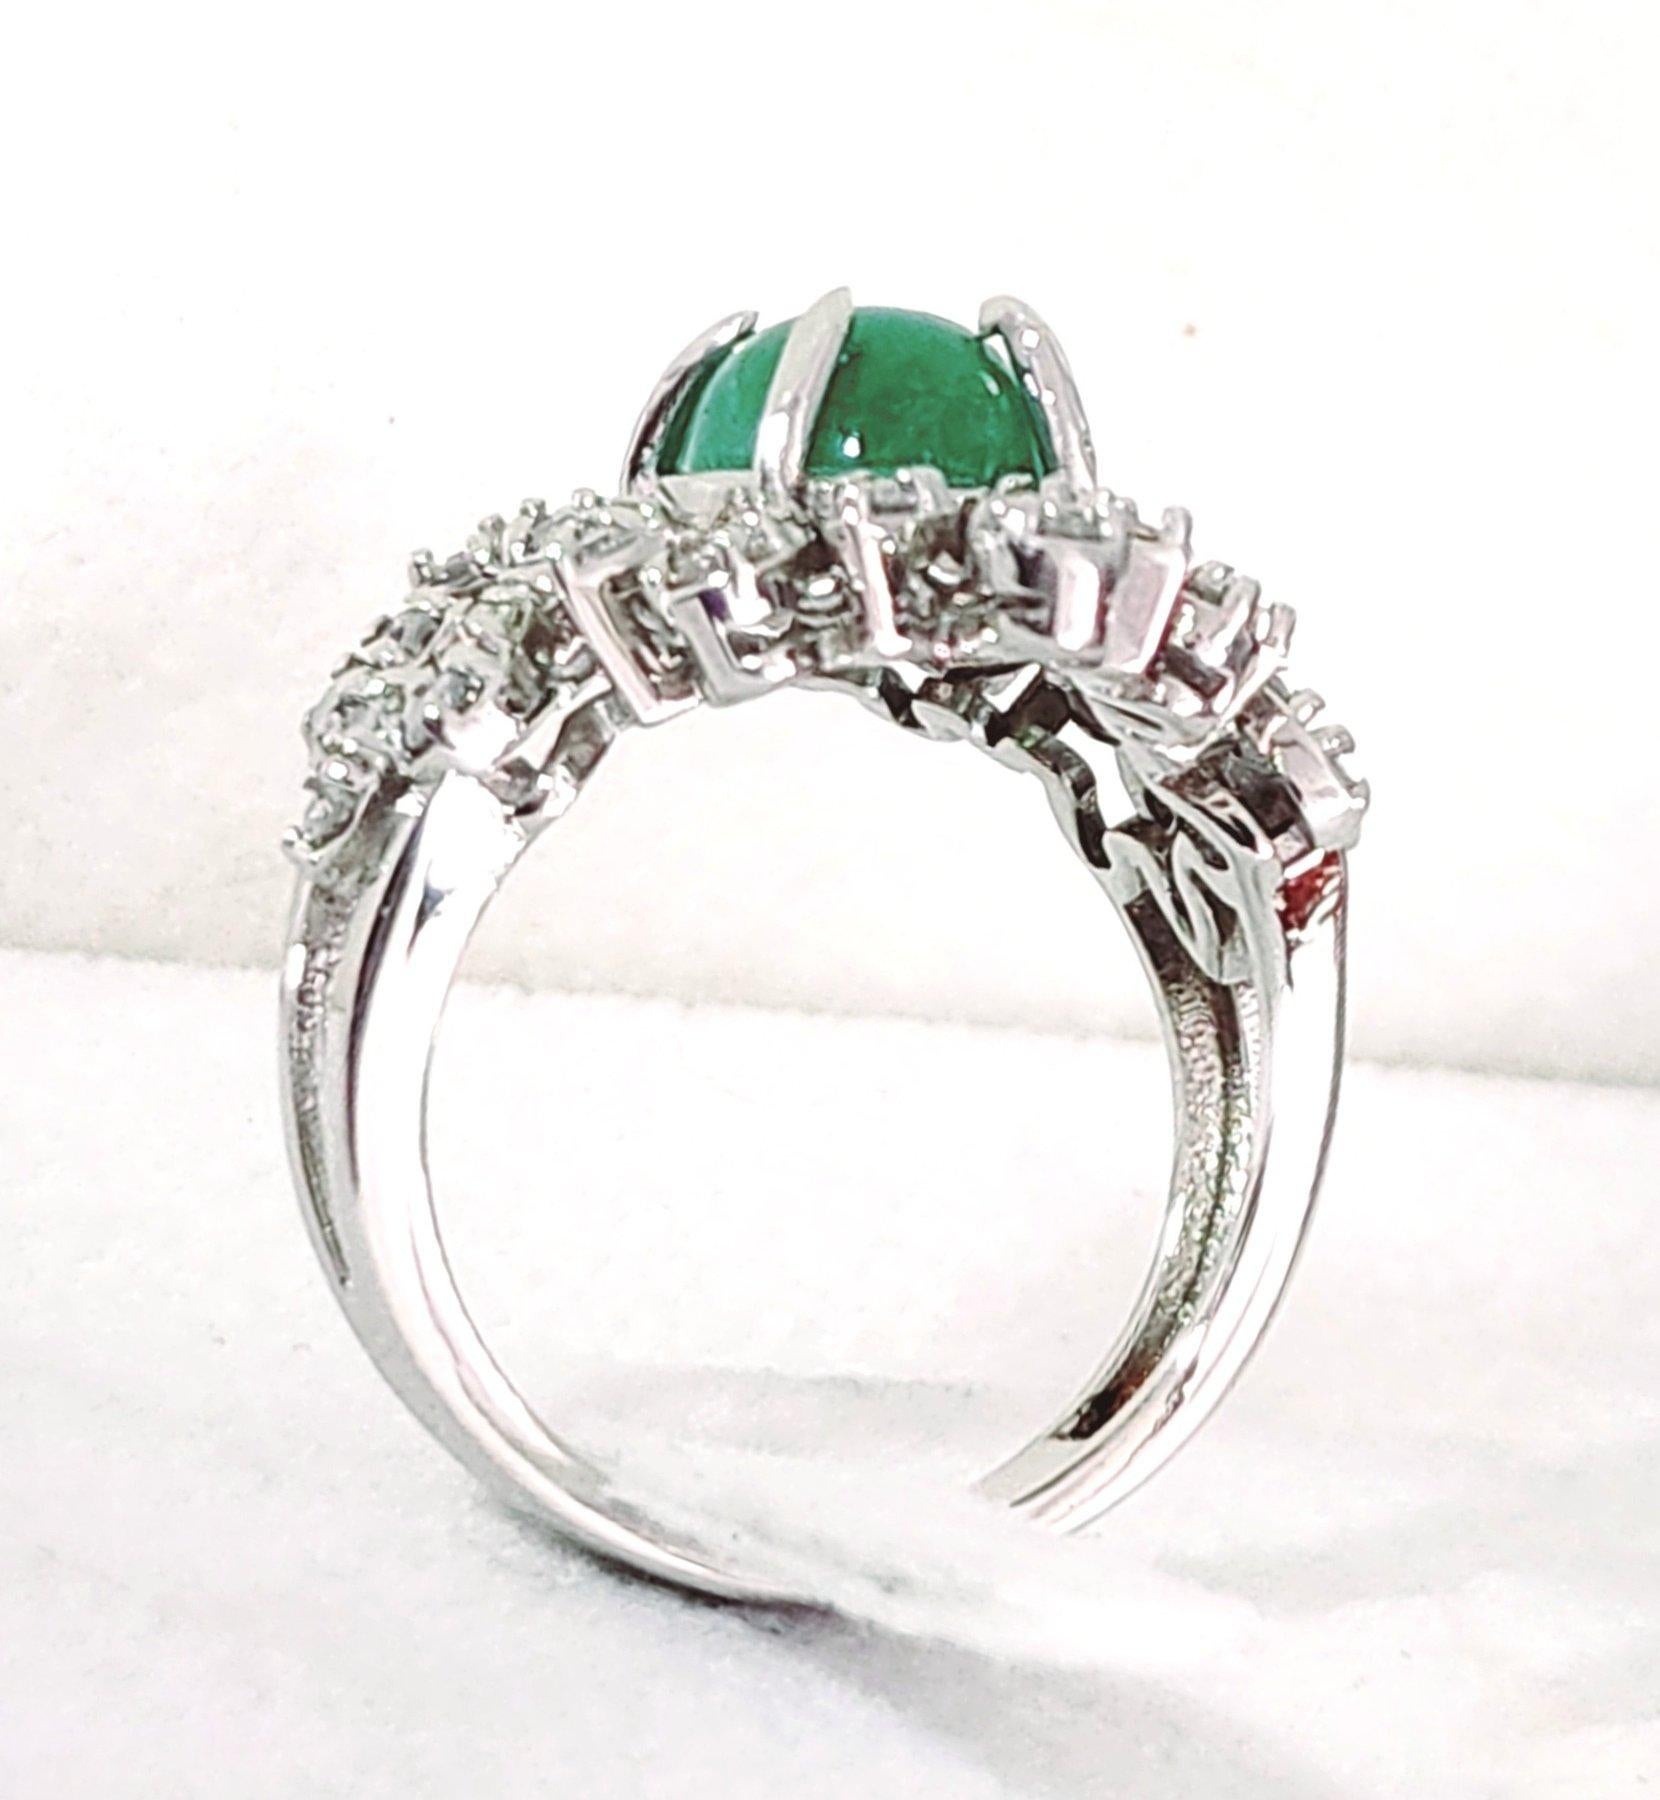 A special Emerald and Diamonds ring made of 14K white gold.
In the center of the ring is set a natural Emerald stone of 2.18 ct in the shape of an oval cabochon.
Around the emerald, the ring is decorated with marquise and pear shapes in which are